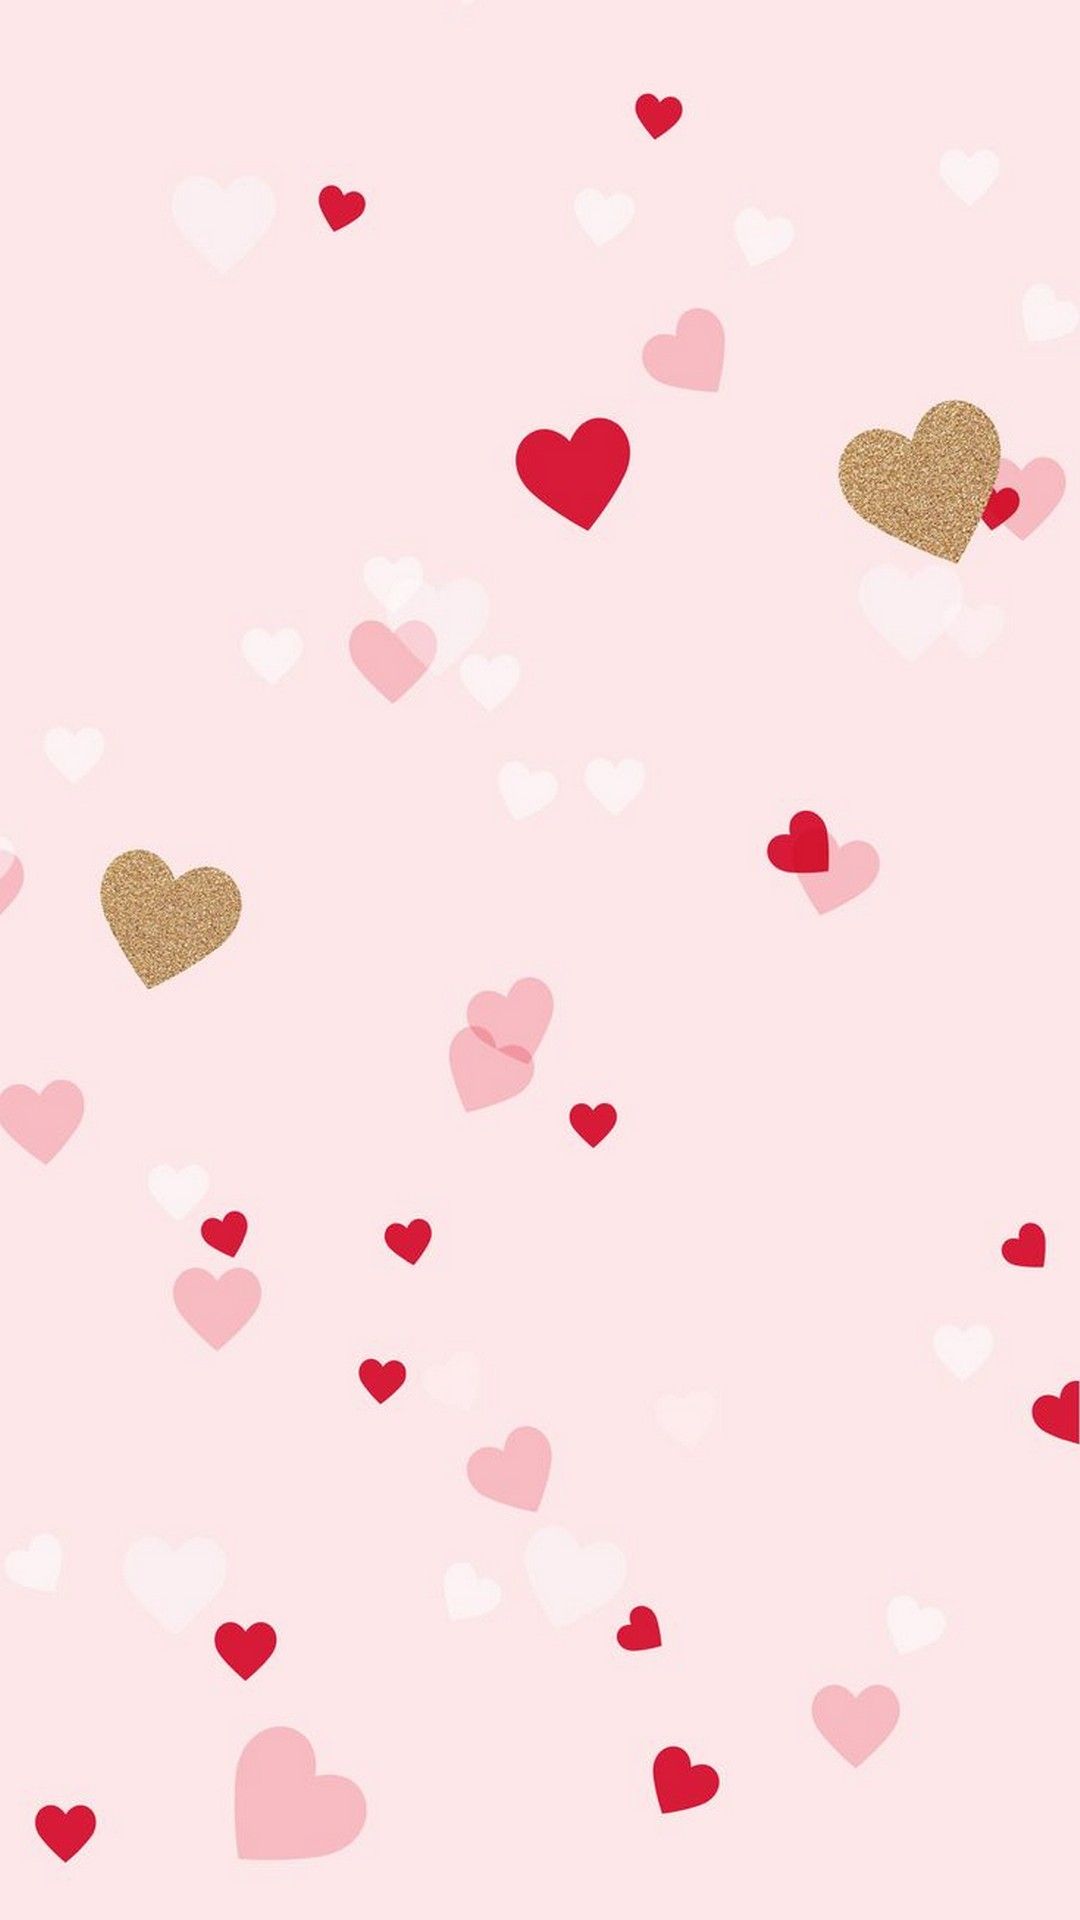 Valentine Wallpaper For iPhone 7 iPhoneWallpapers Cute iphone